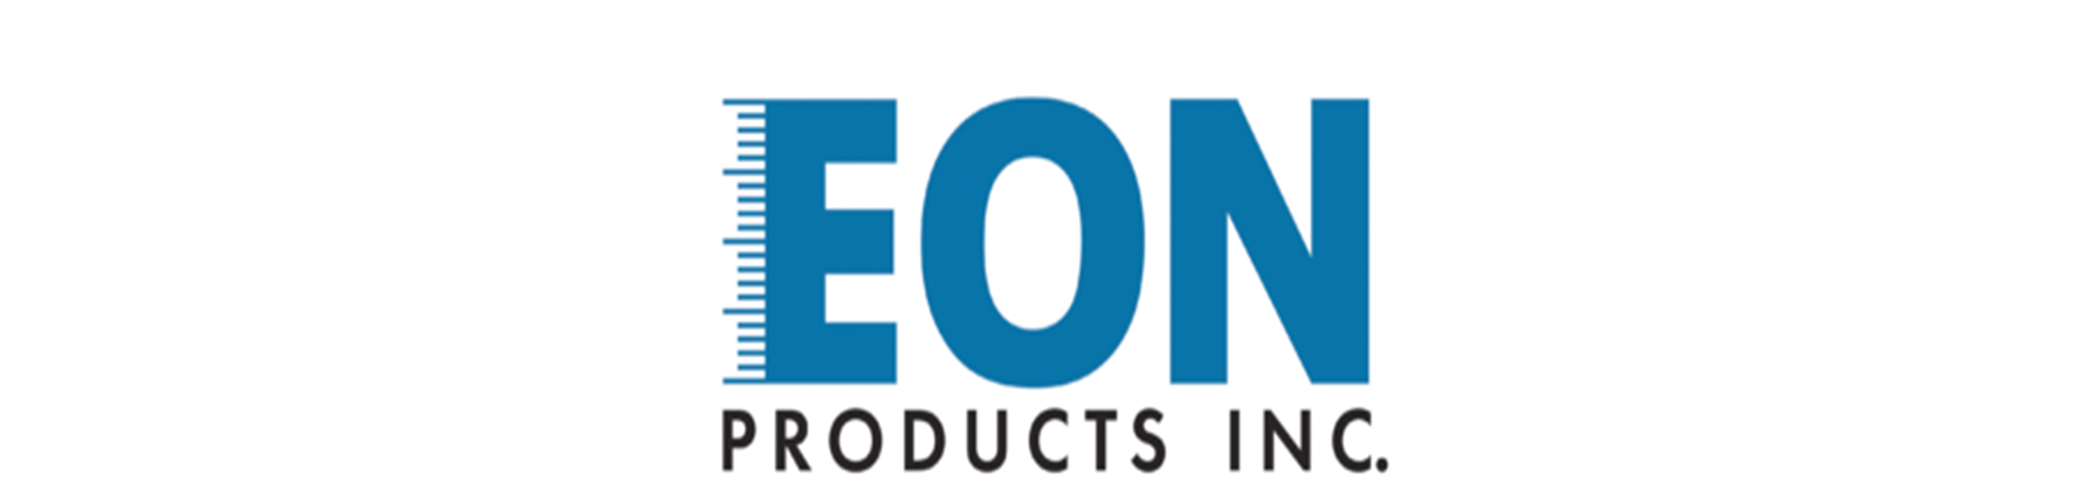 EON Products, Inc. 